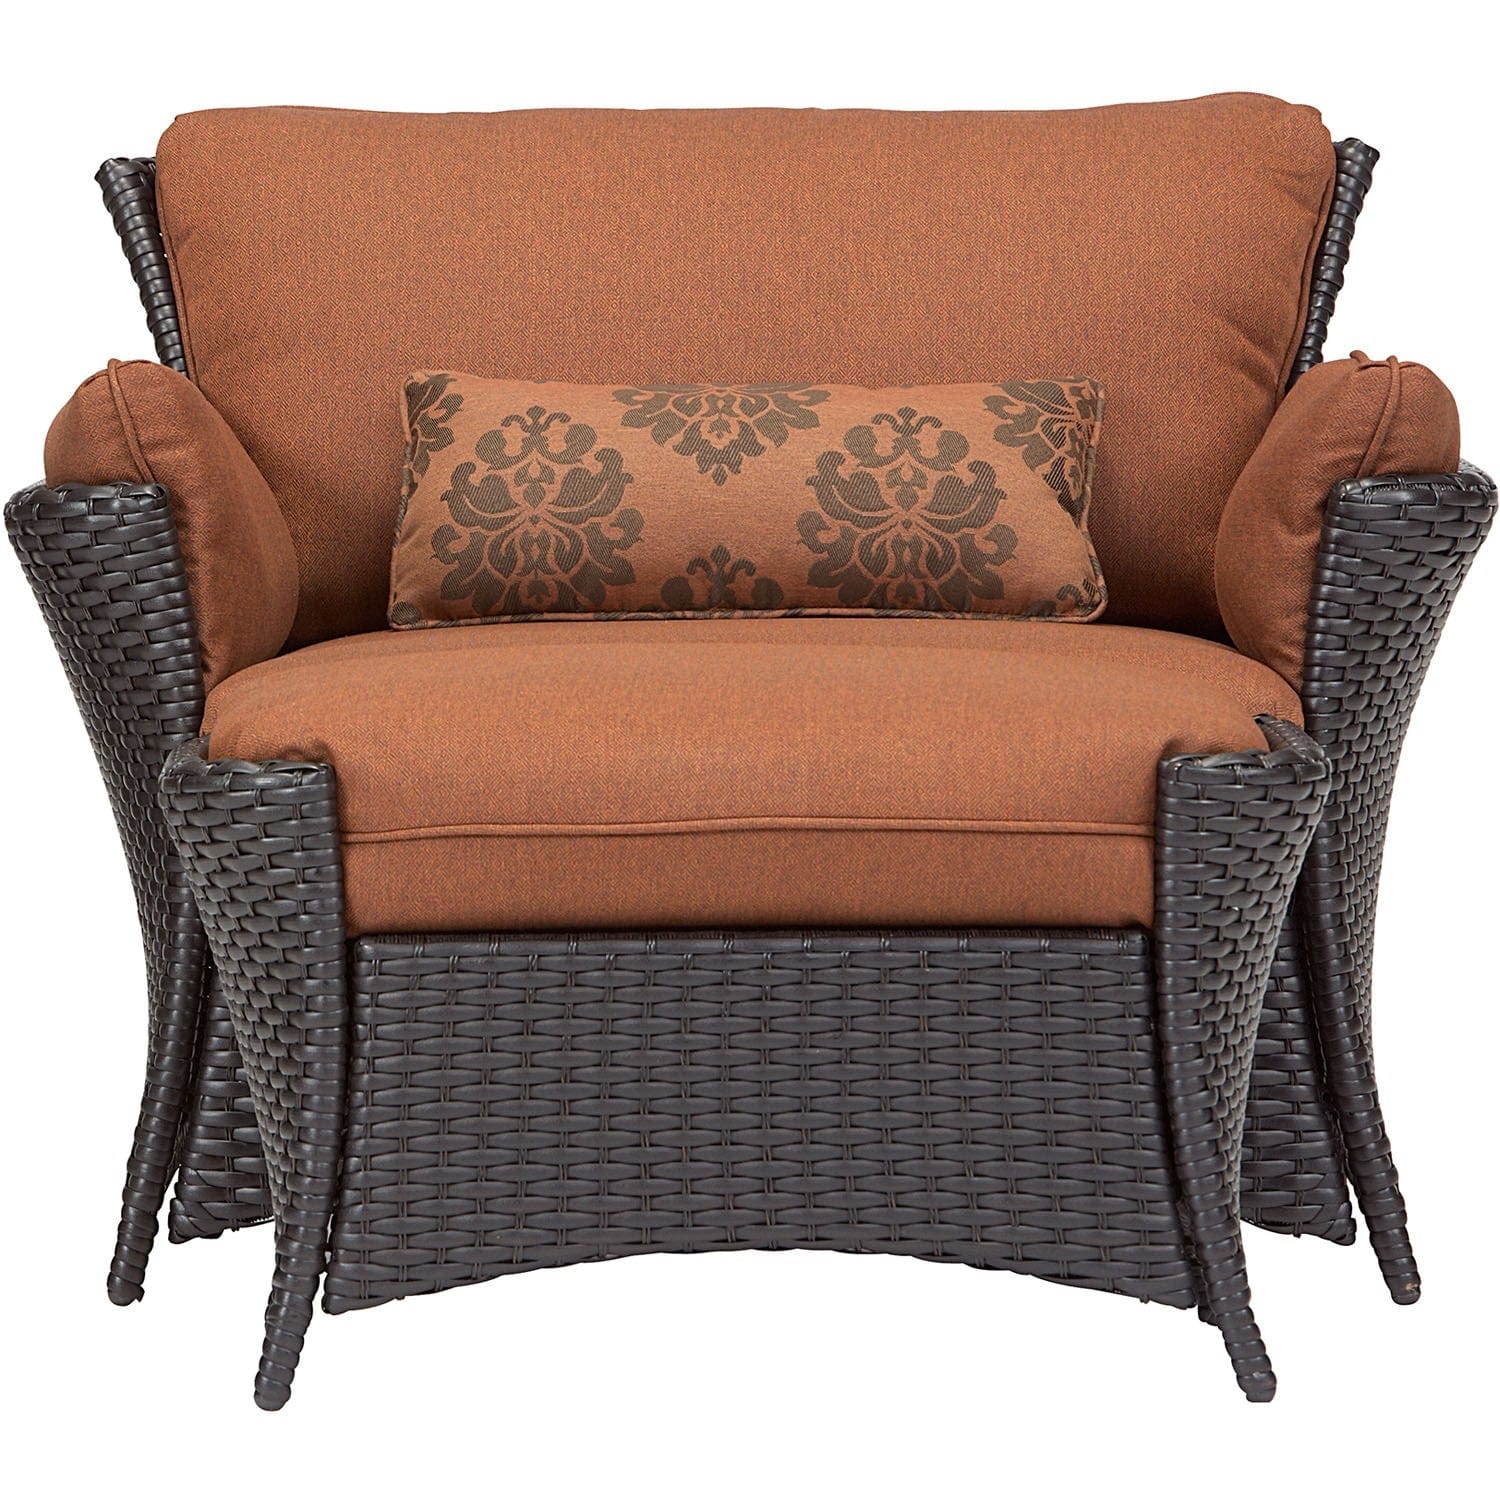 Hanover Lounge Chairs Hanover - Strathmere Allure 2pc Seating Set: Oversized Chair and Ottoman